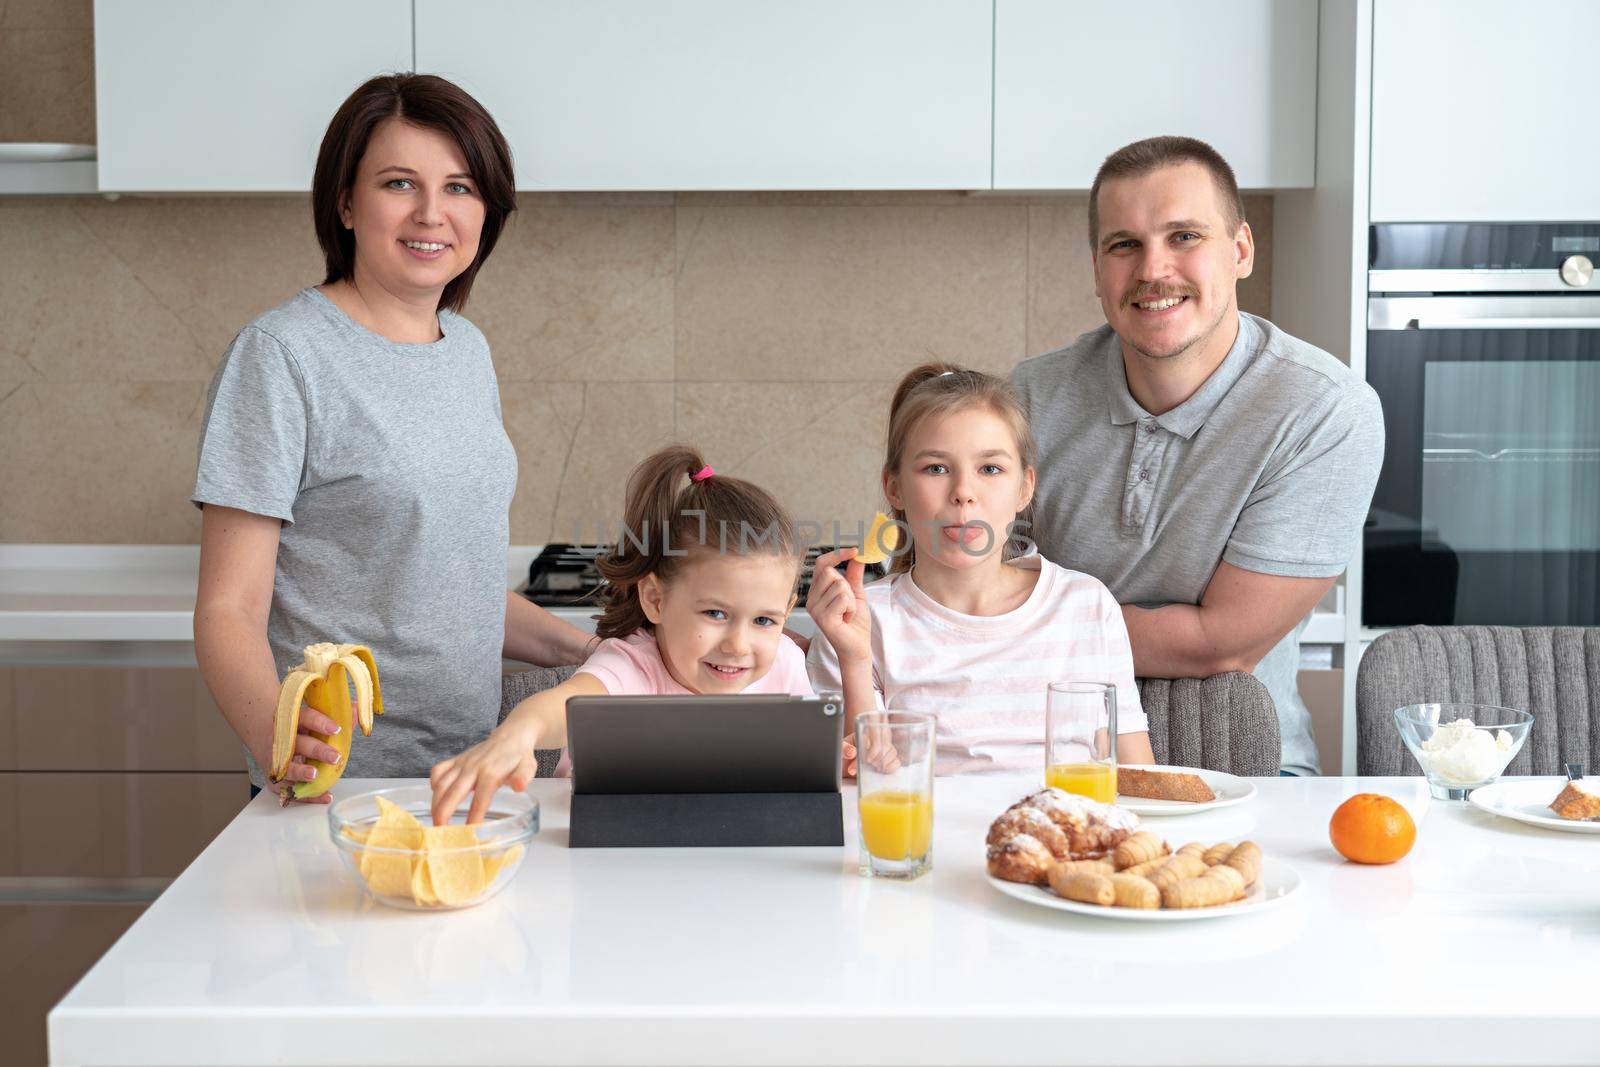 Smiling Family Dining Together at kitchen table